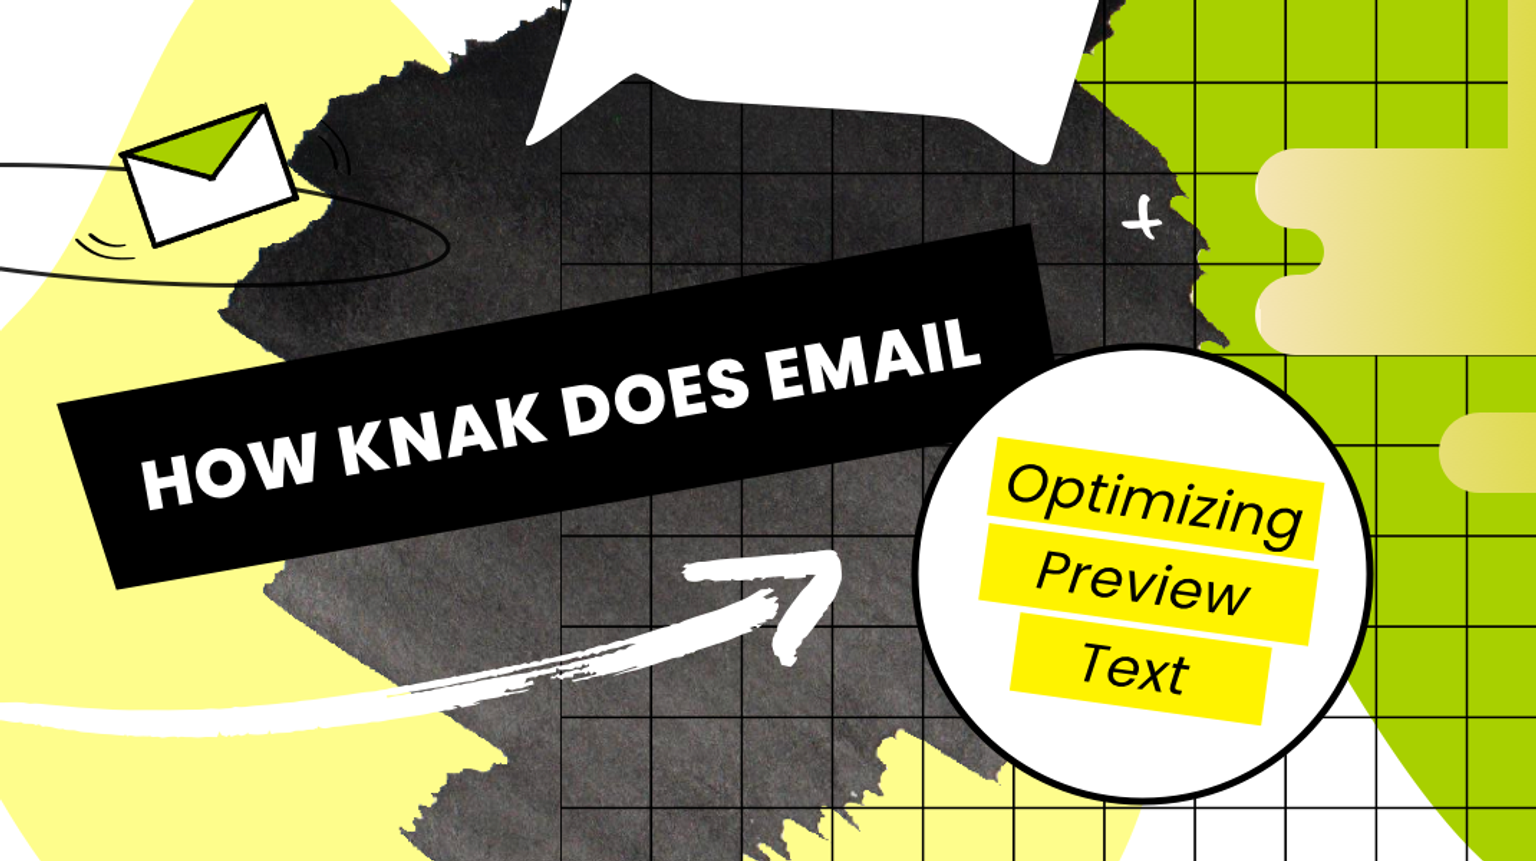 How Knak Does Email: Optimizing Preview Text